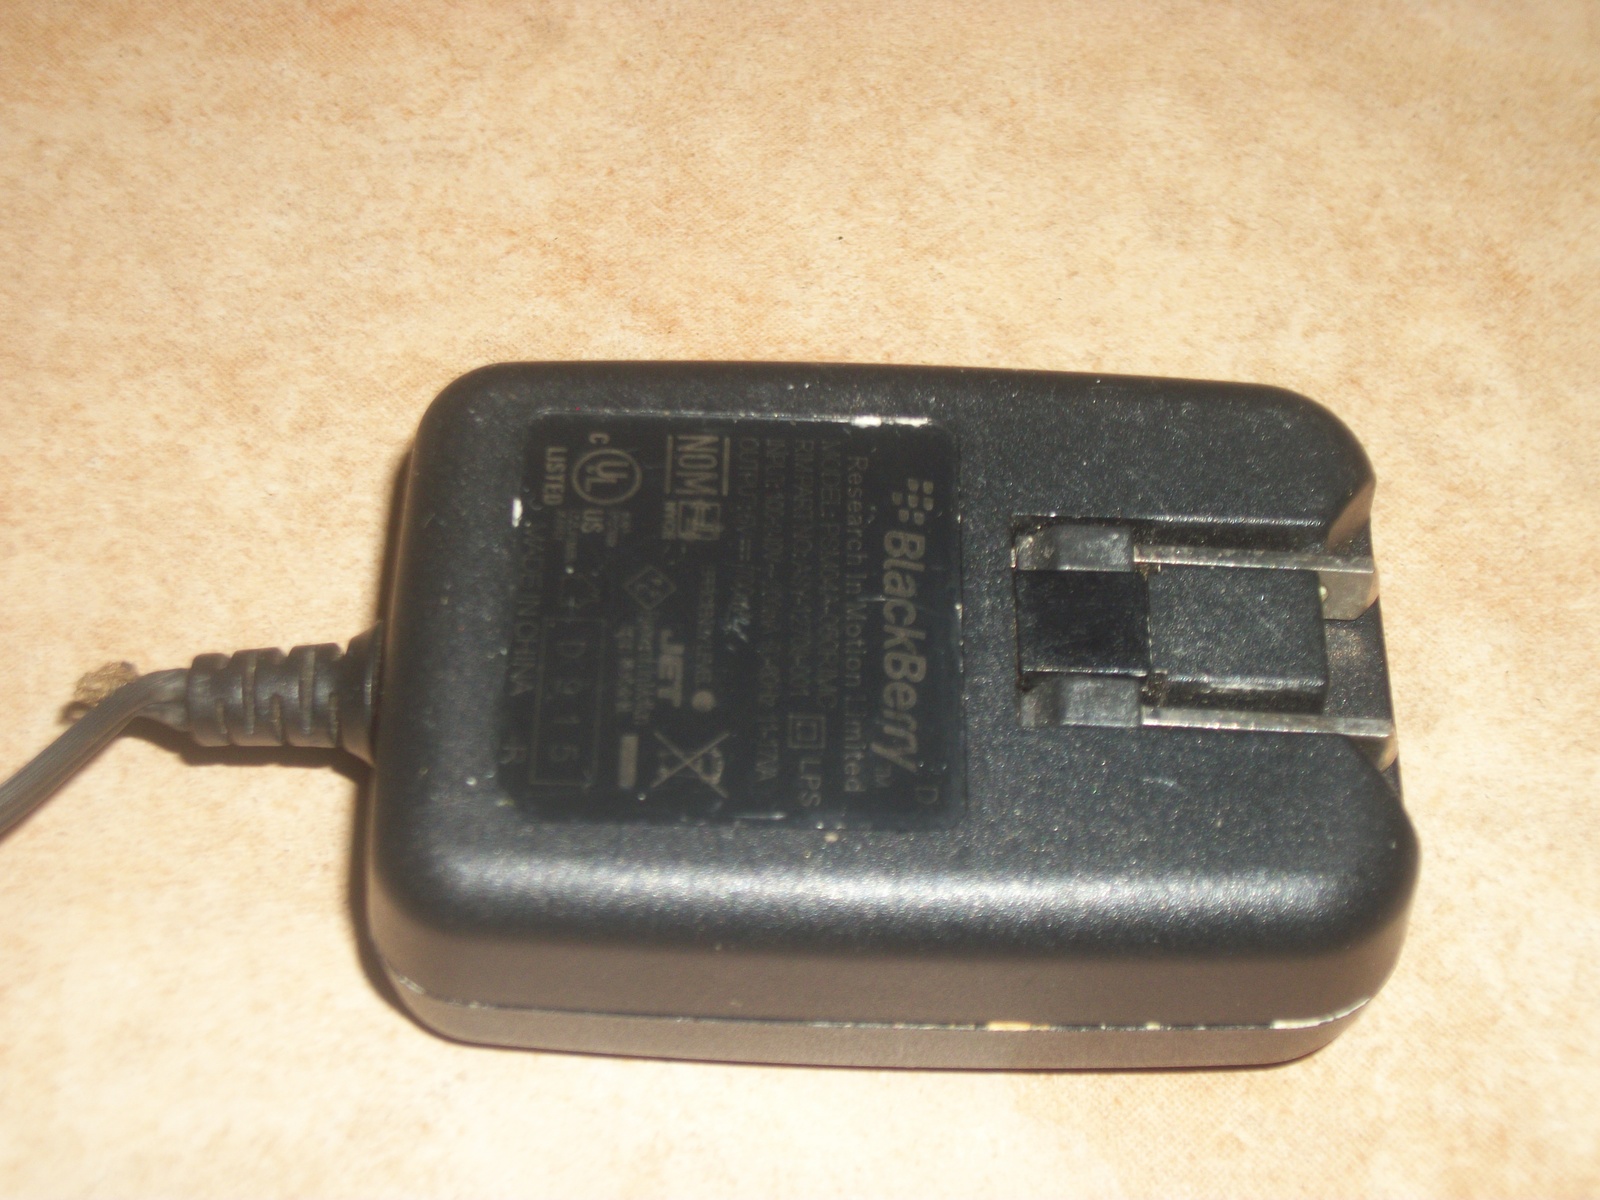 cell phone charger blackberry model PSM04A-12709 - $5.00